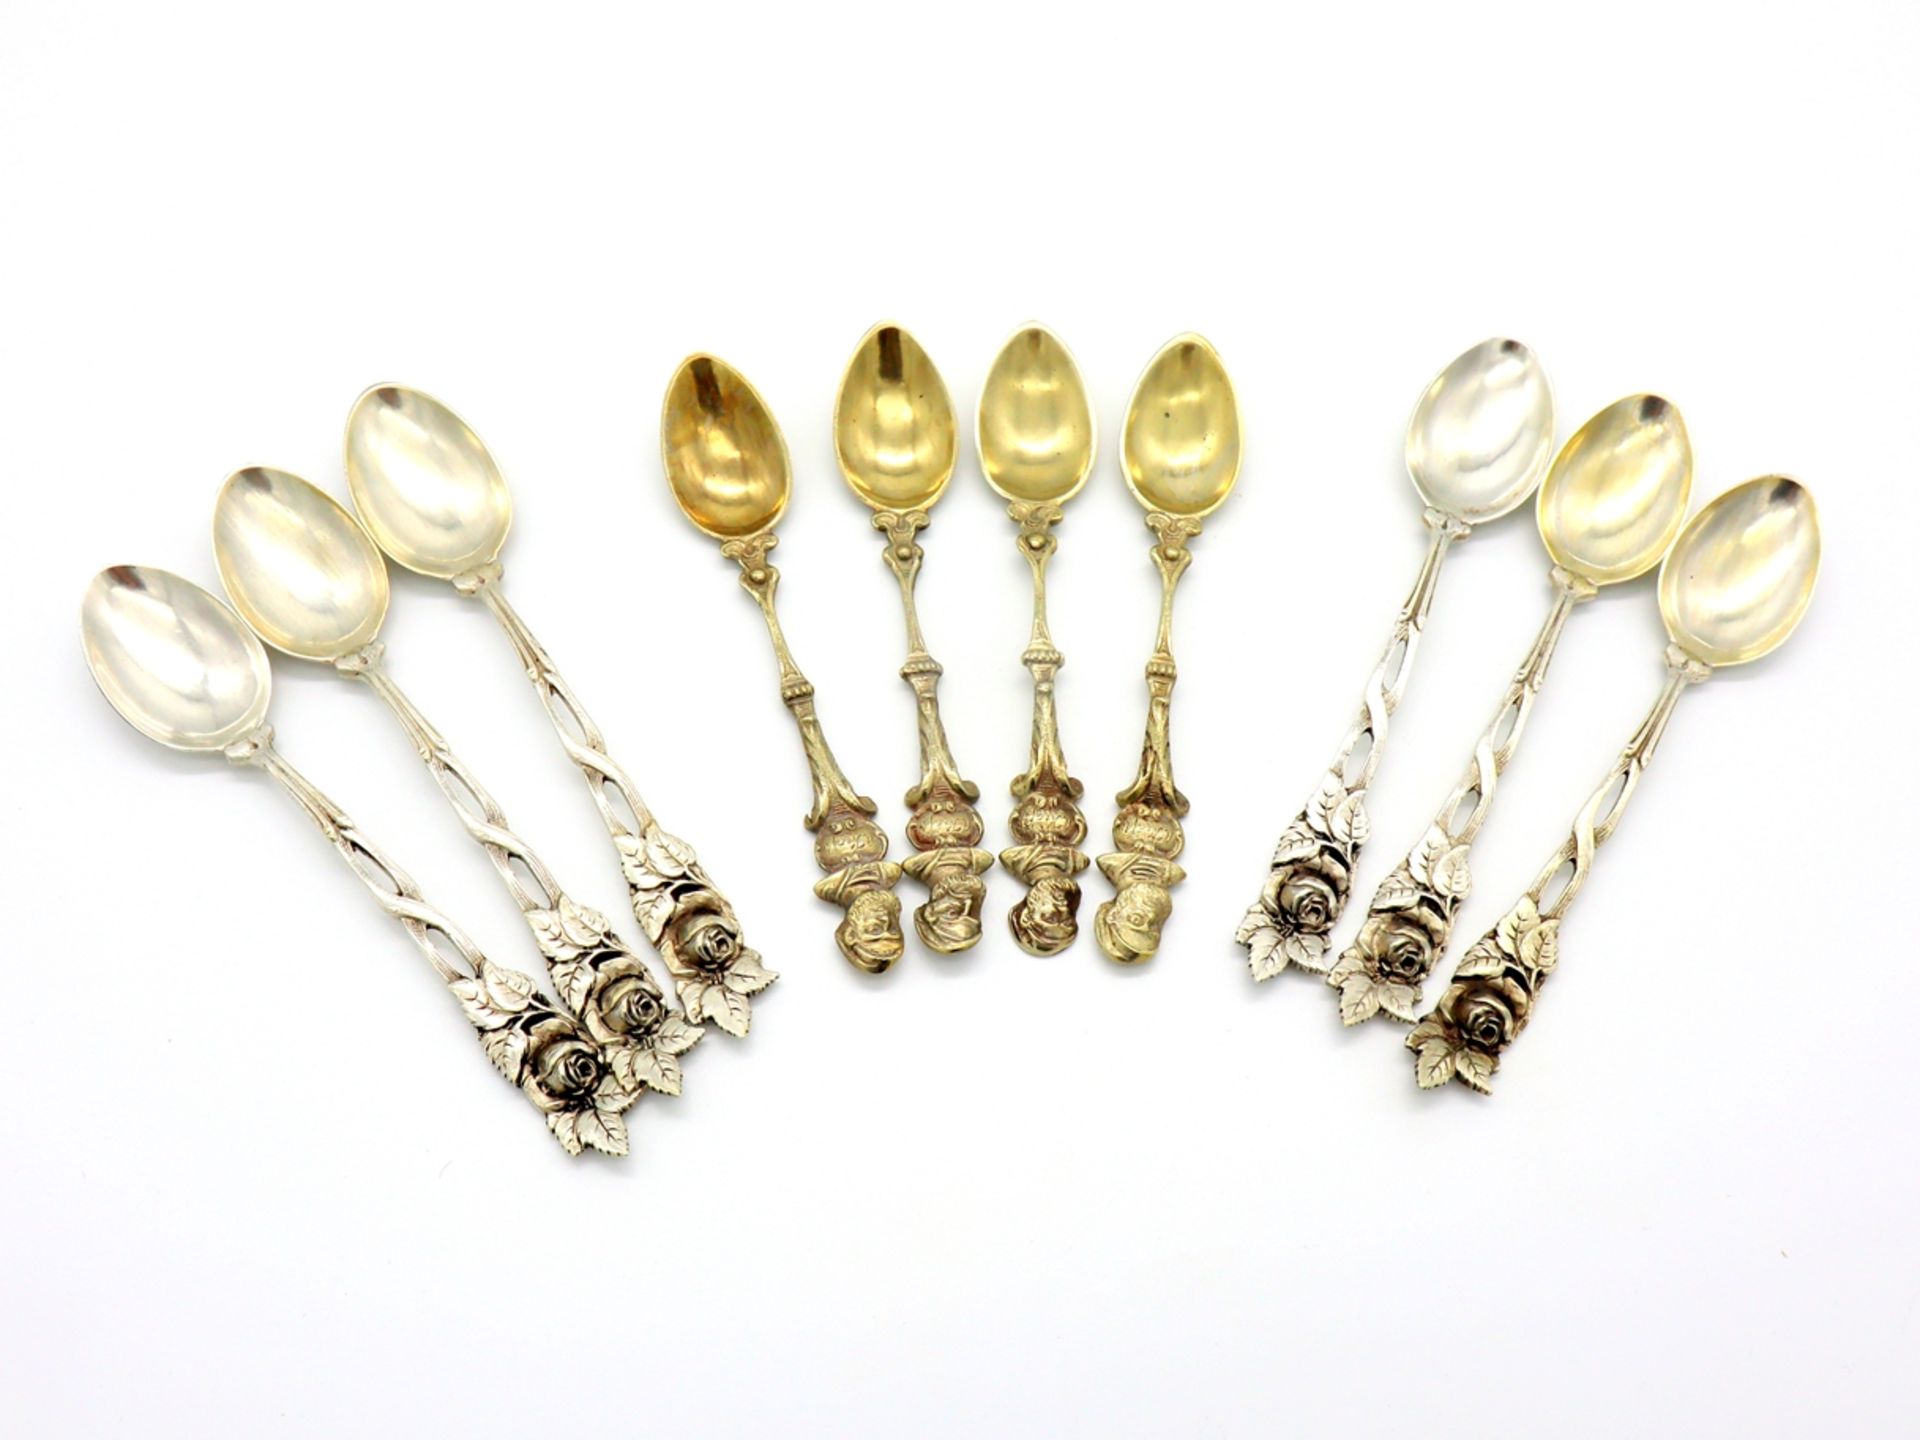 6 dessert spoons Hanauer Rose, 800 silver & 4 dessert spoons silver plated in case. - Image 8 of 8